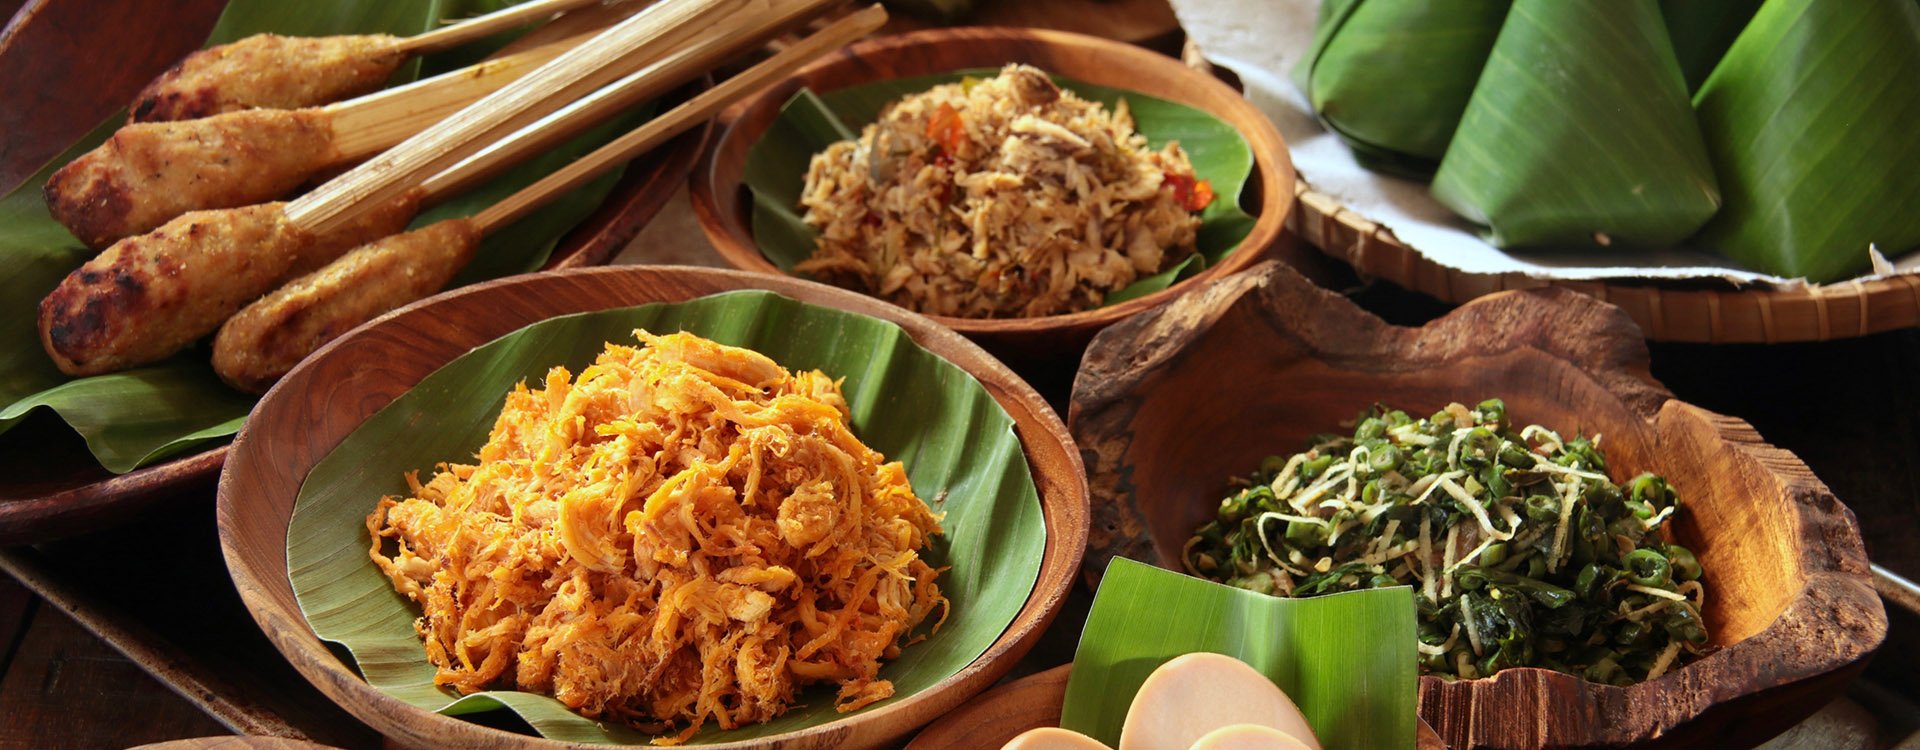 Nasi Jinggo. Balinese meal of rice and side dishes in small banana leaf parcels